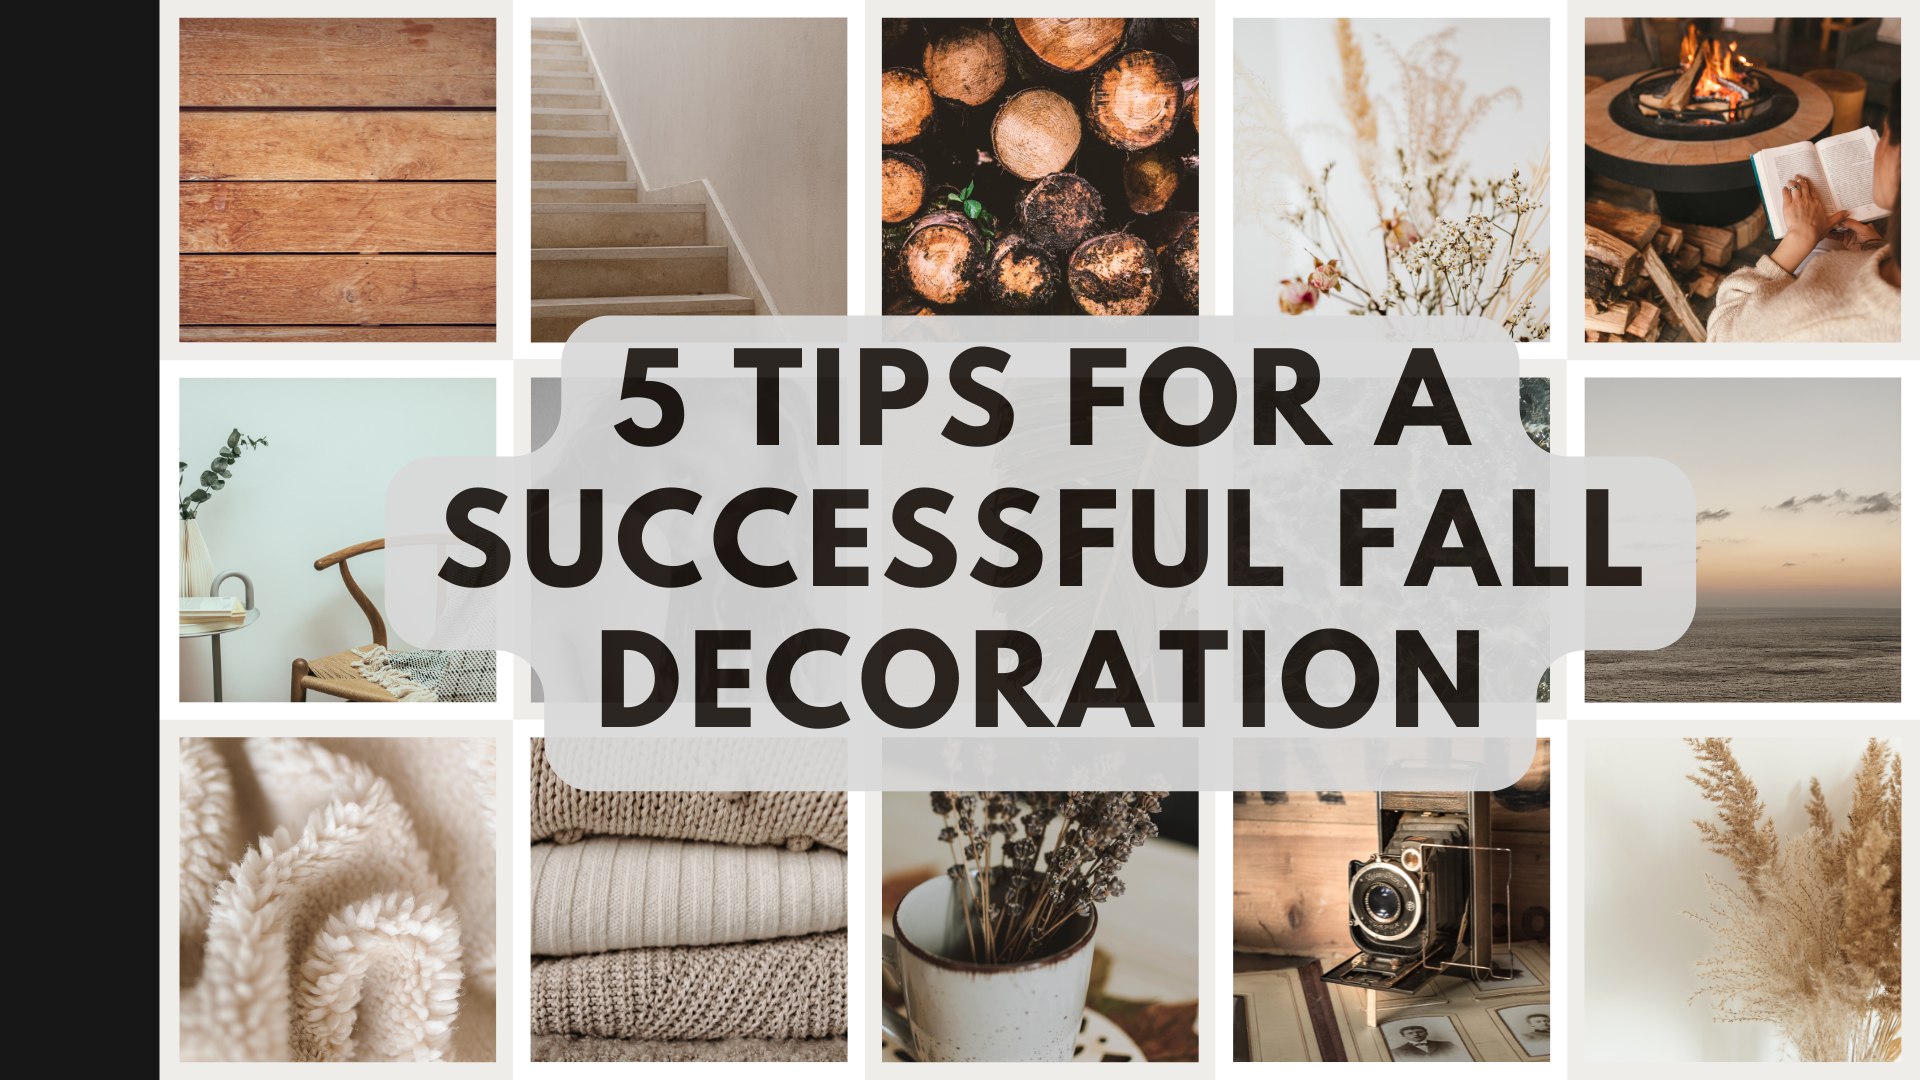 5 tips for a successful fall decoration